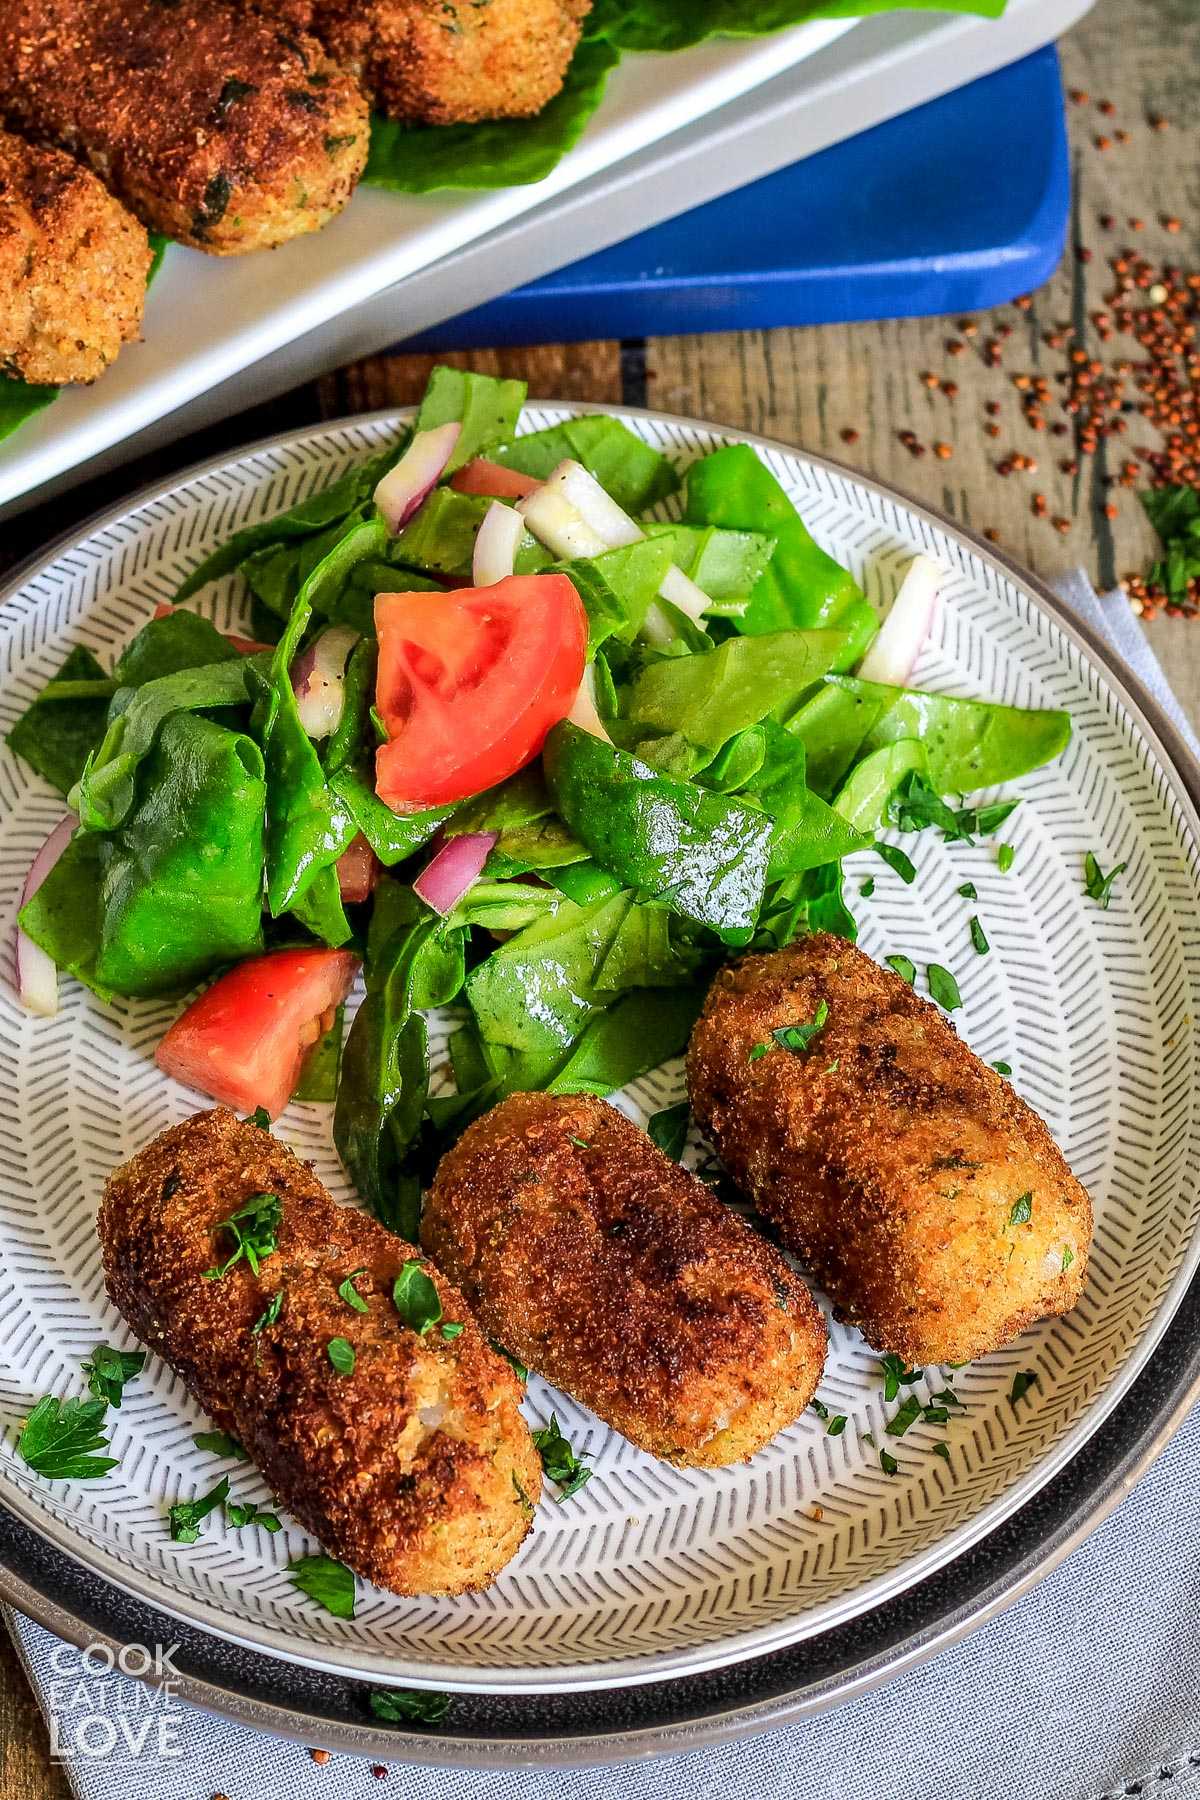 Vegetarian croquettes on plate with small salad.